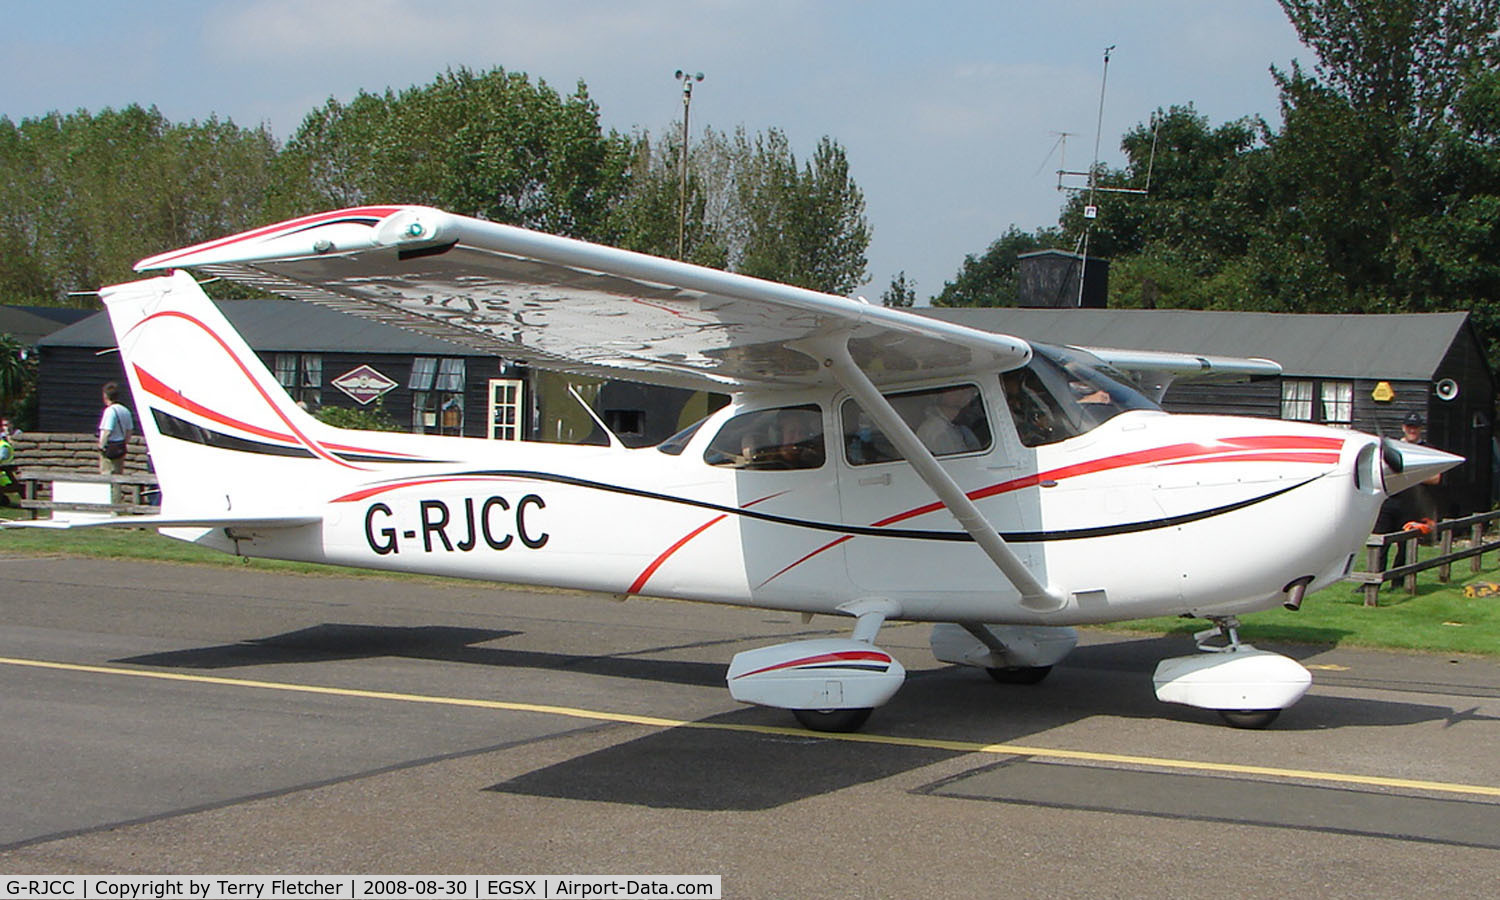 G-RJCC, 2007 Cessna 172SP Skyhawk C/N 172S10525, Visitor to North Weald on RV Fly-in Day 2008